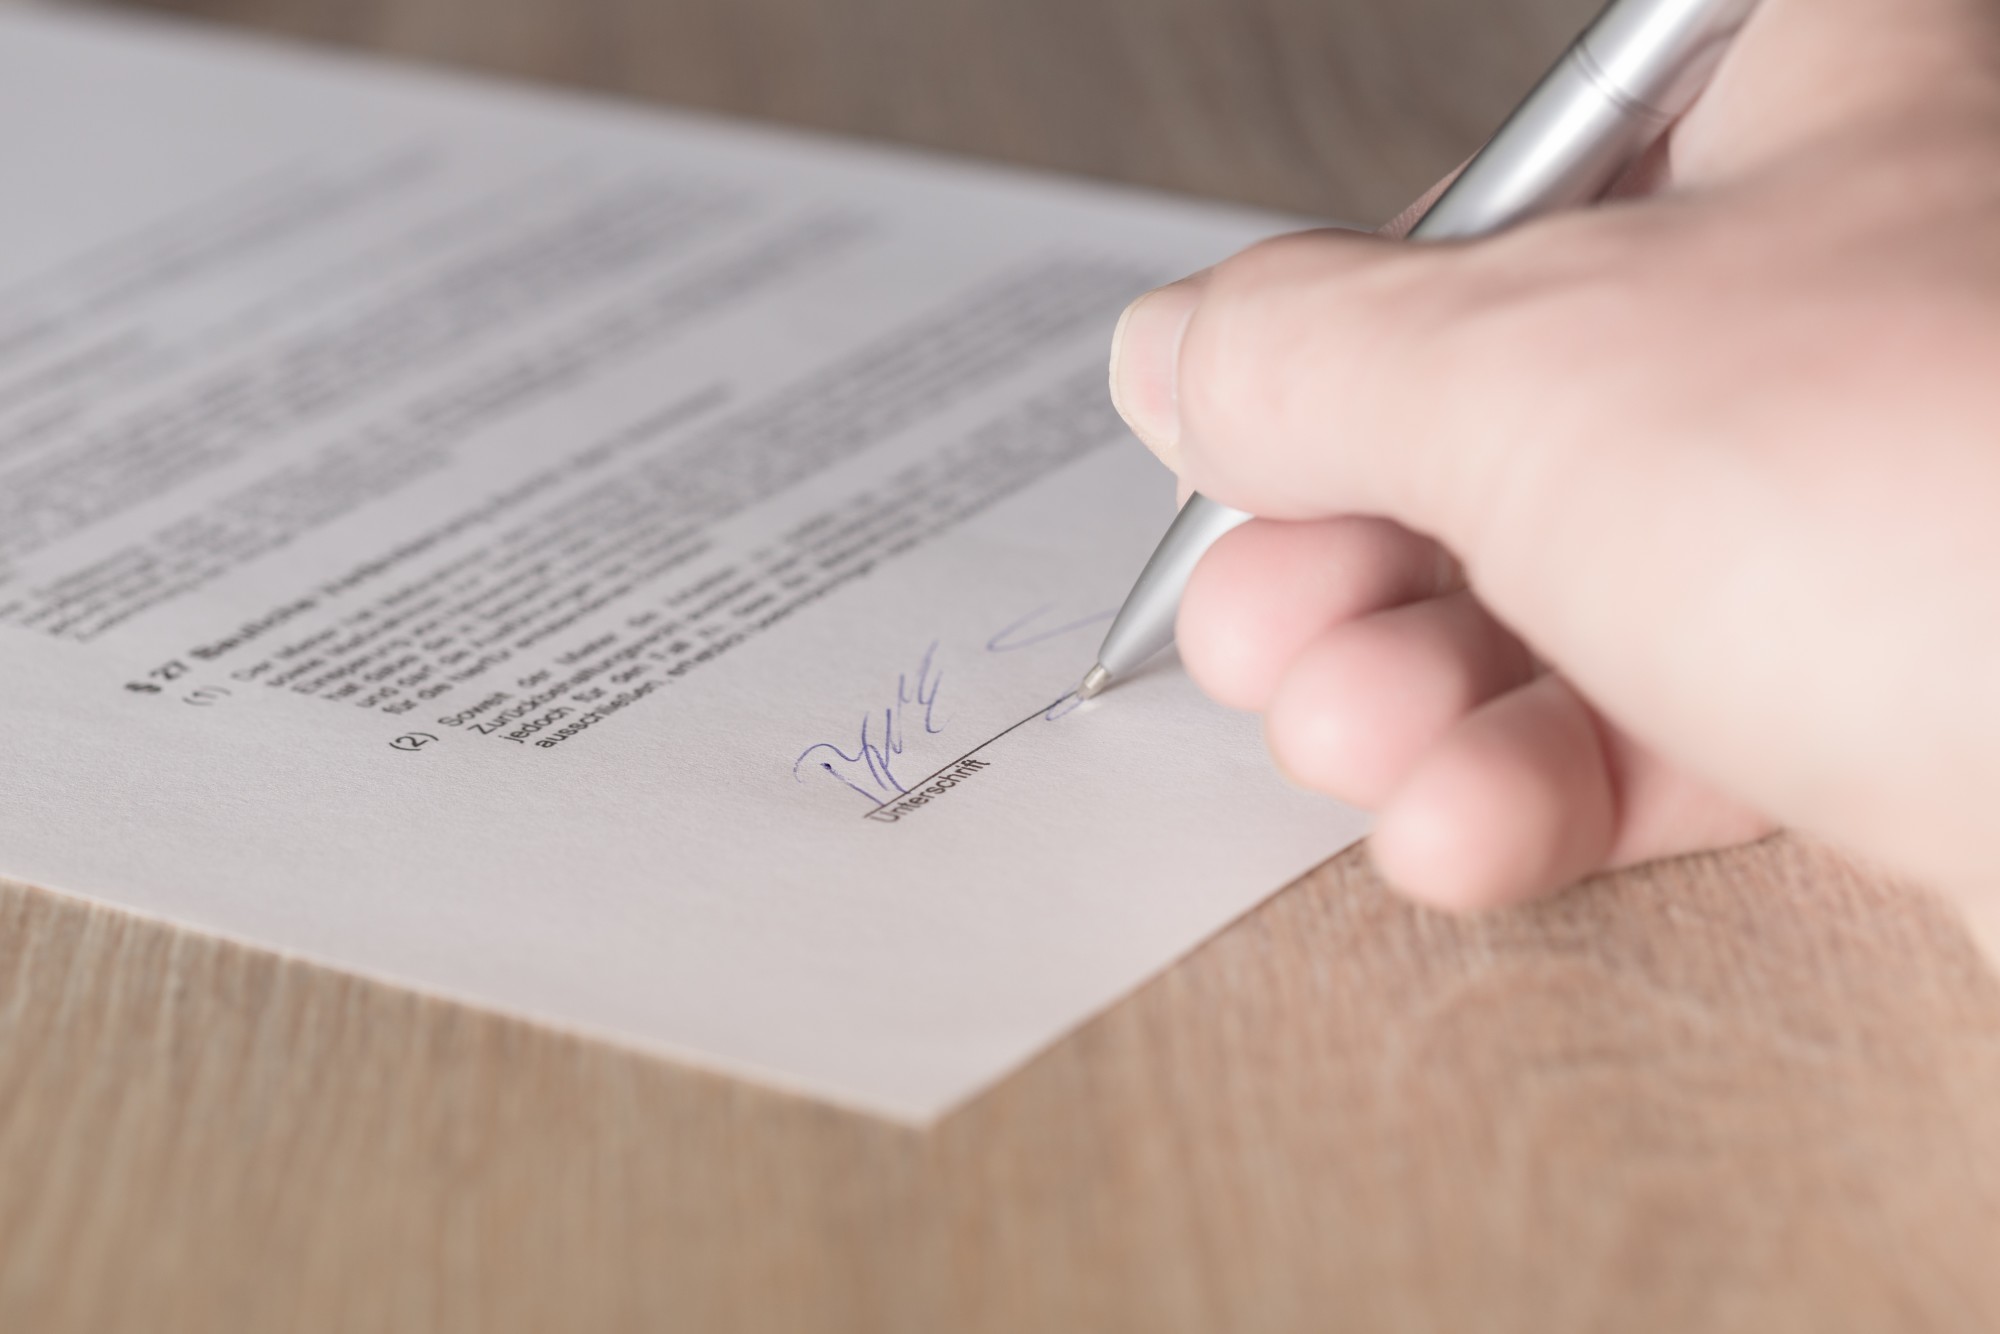 Simple Lease Agreement How To Write An Iron Clad Renters Contract